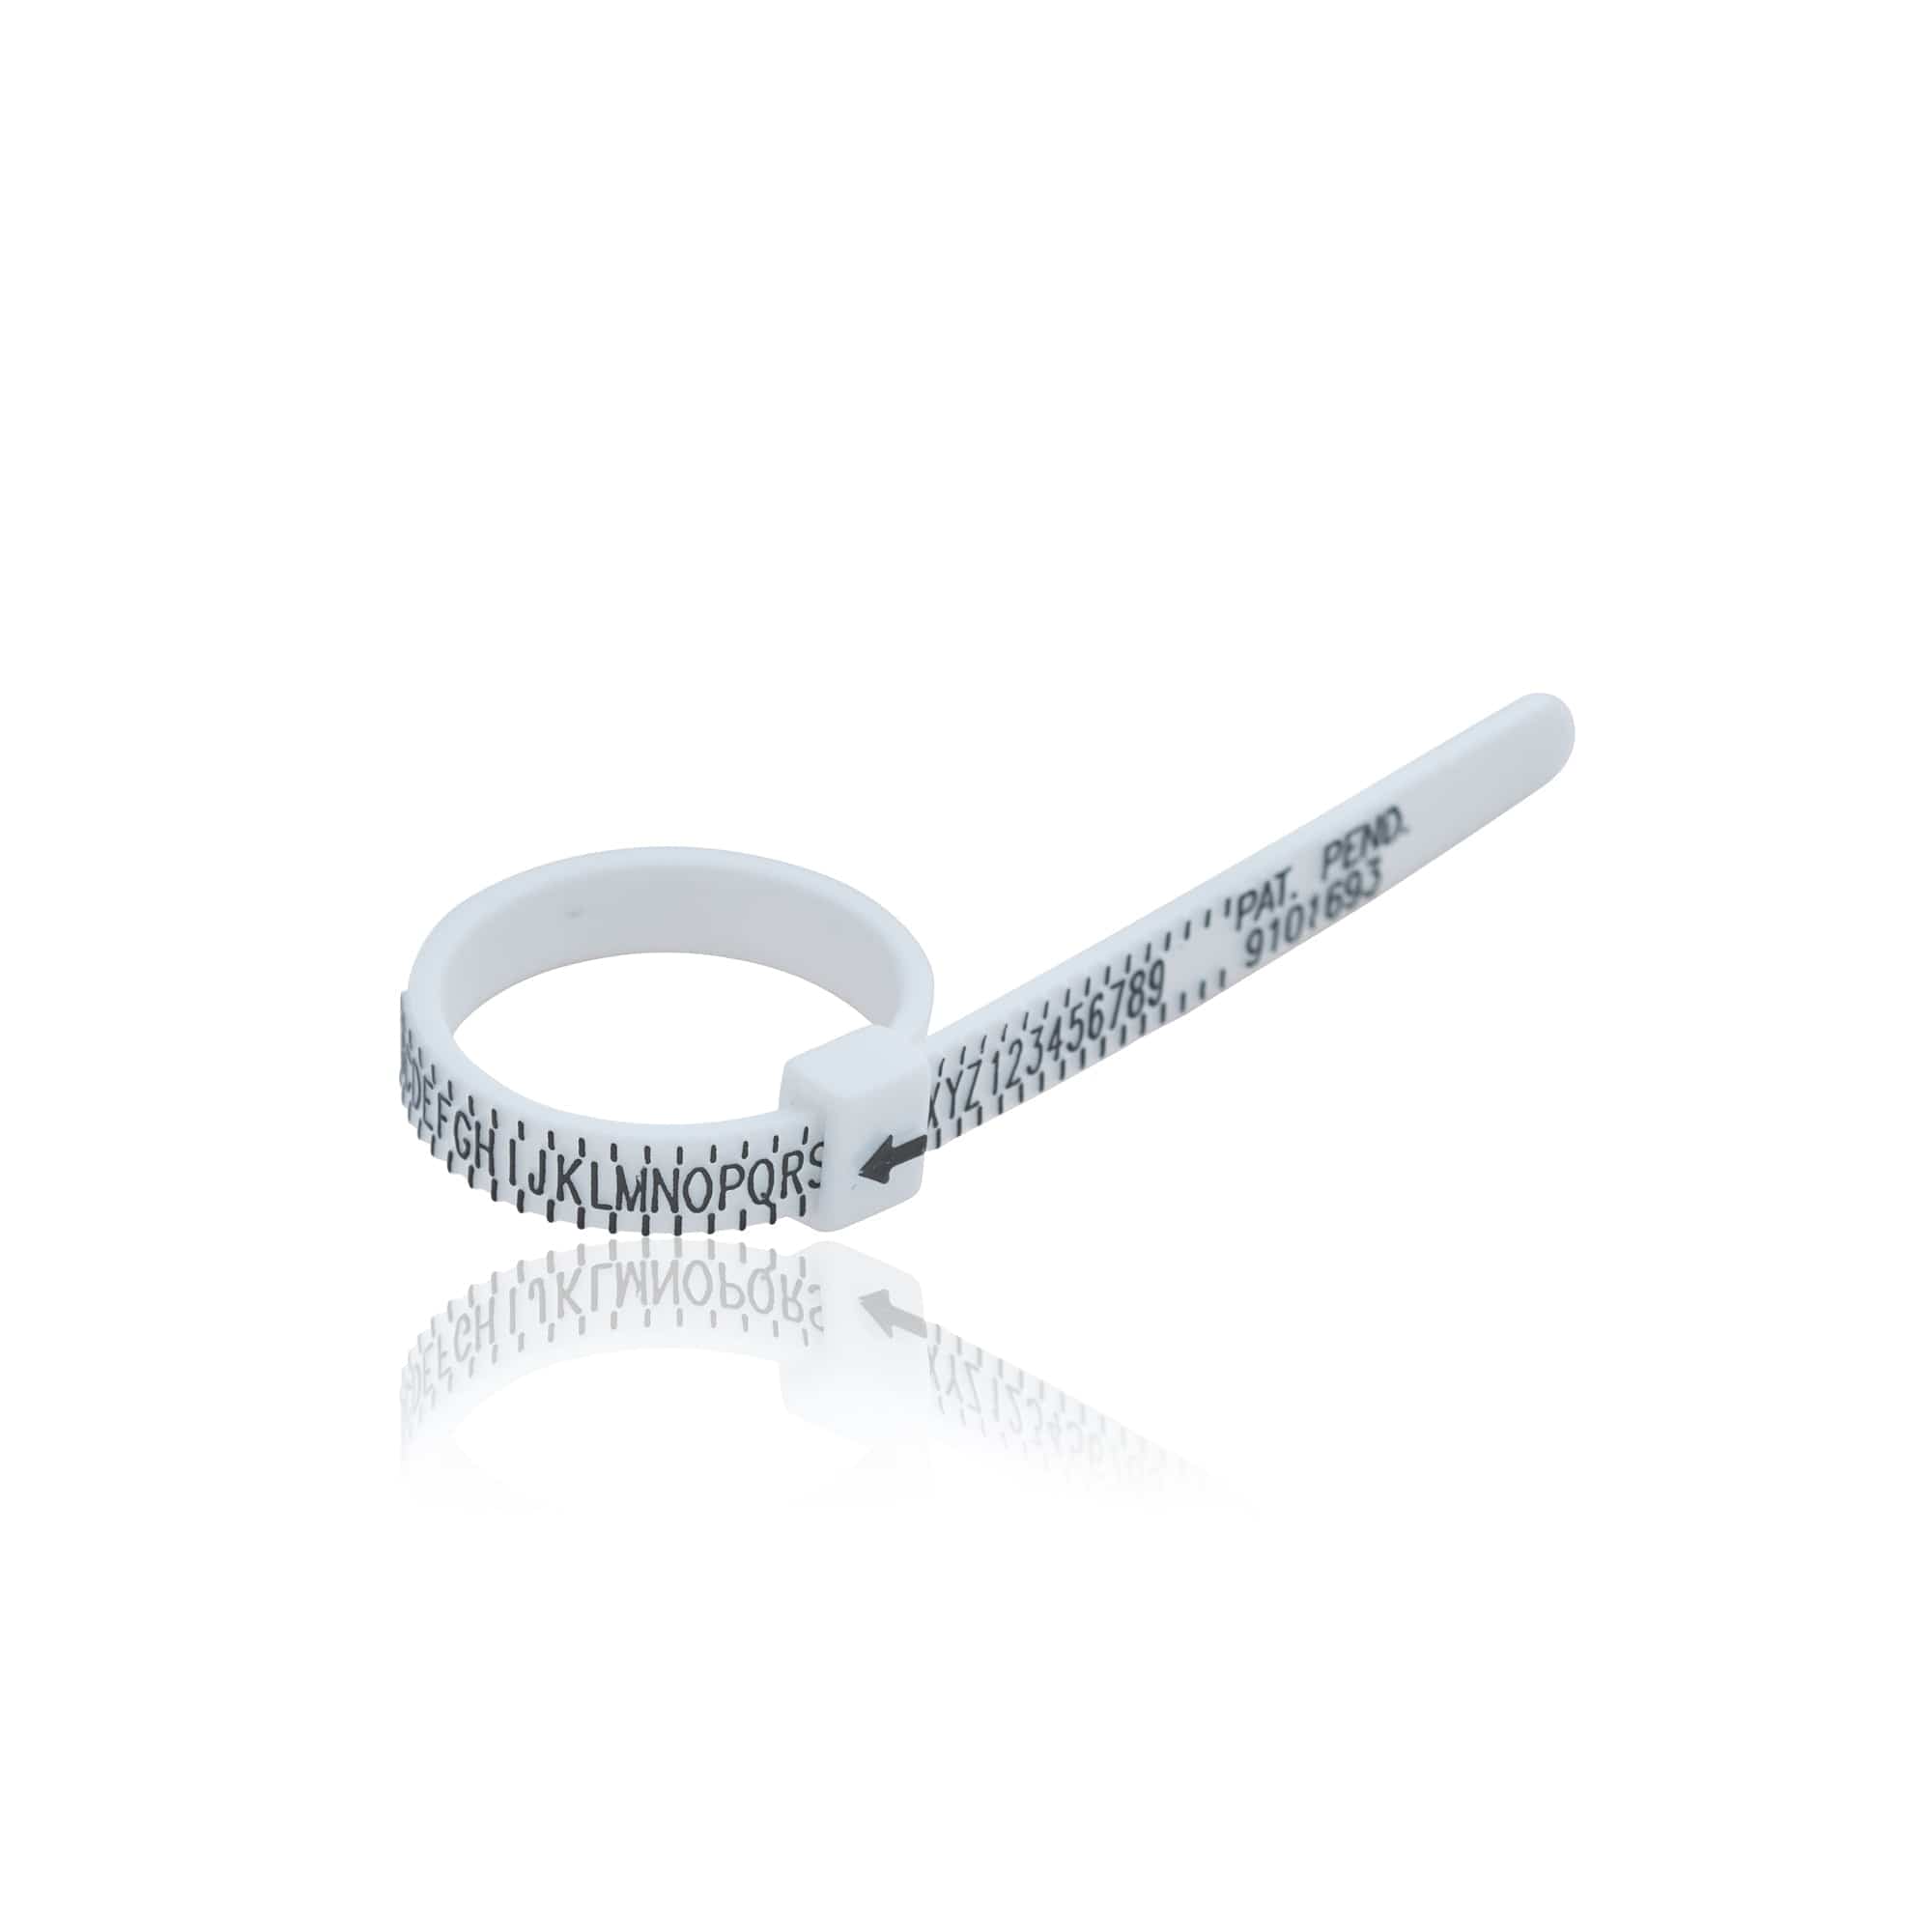 Free Ring Size Kit and Width Guide, ring size - thirstymag.com